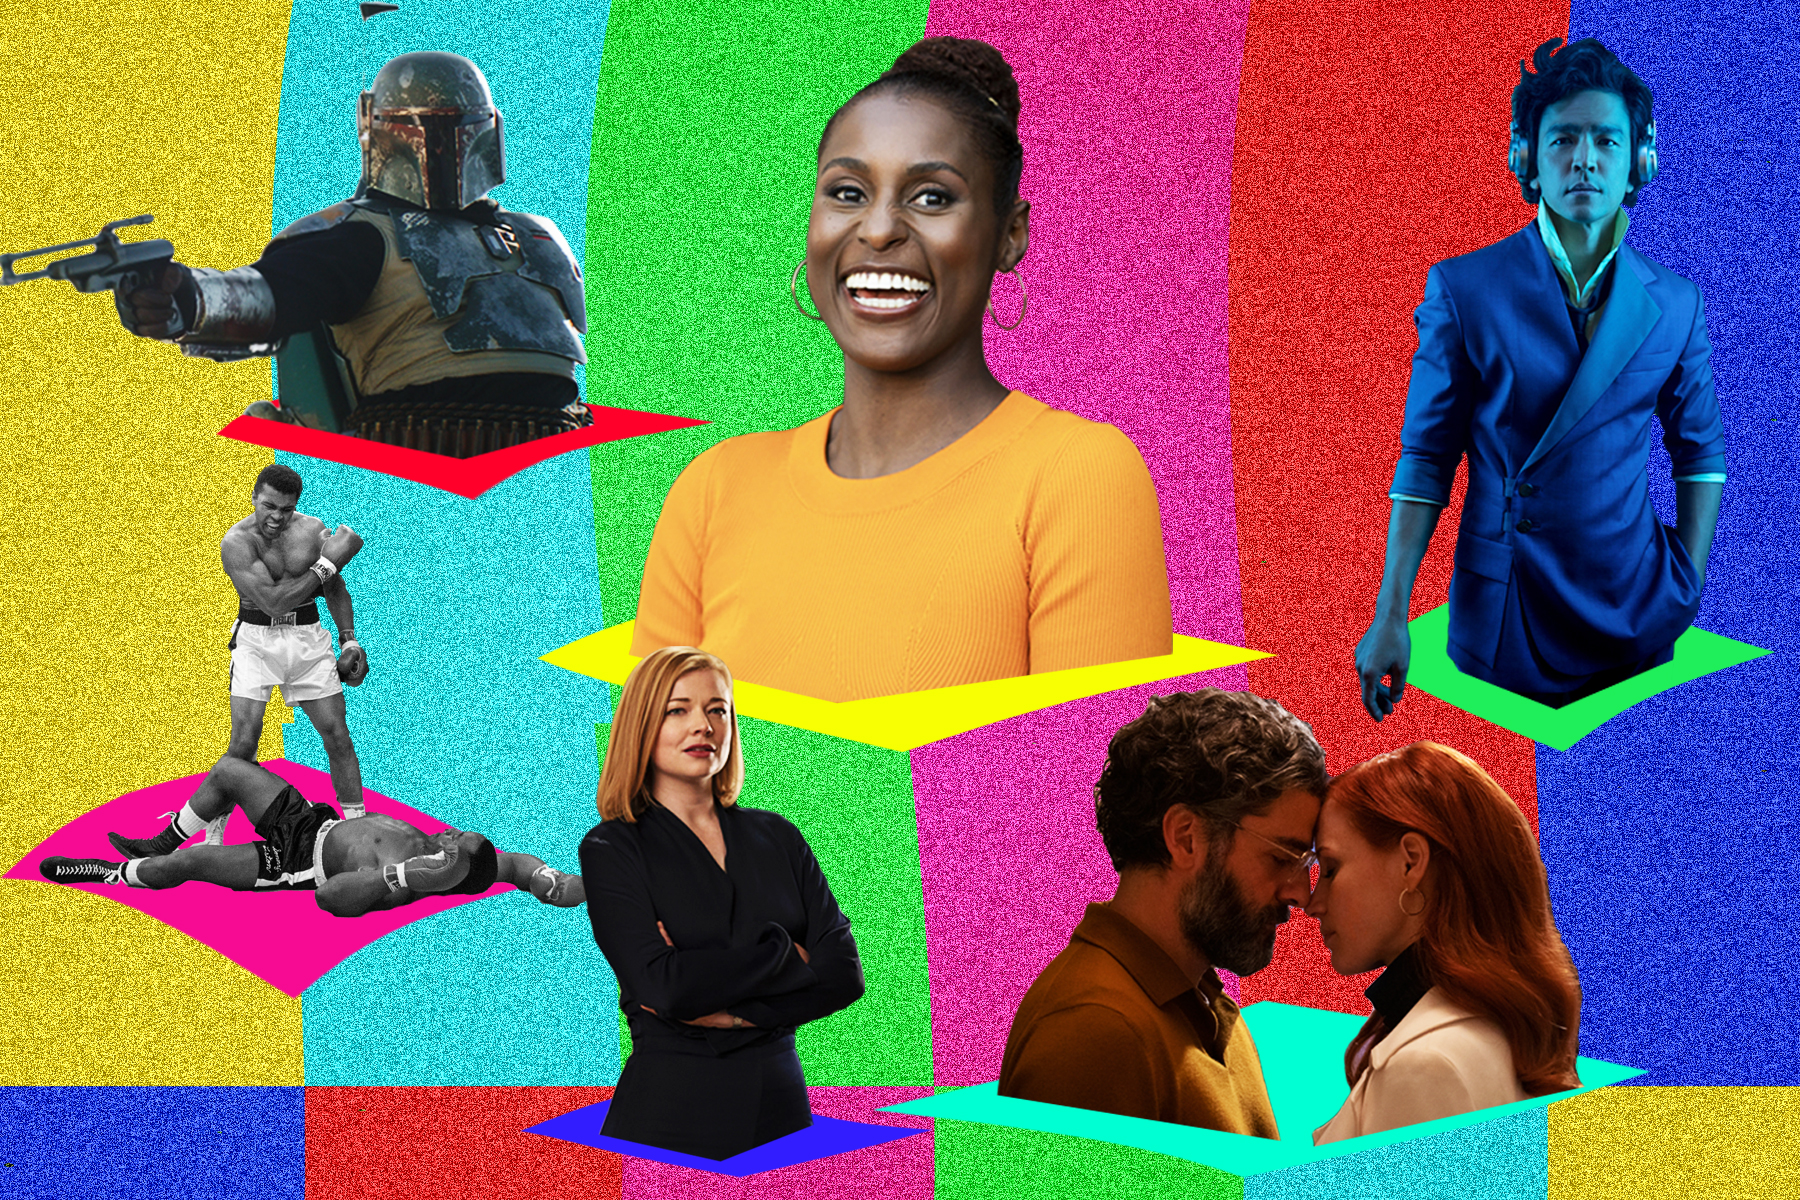 Fall TV Preview 2021: 15 Shows to Watch